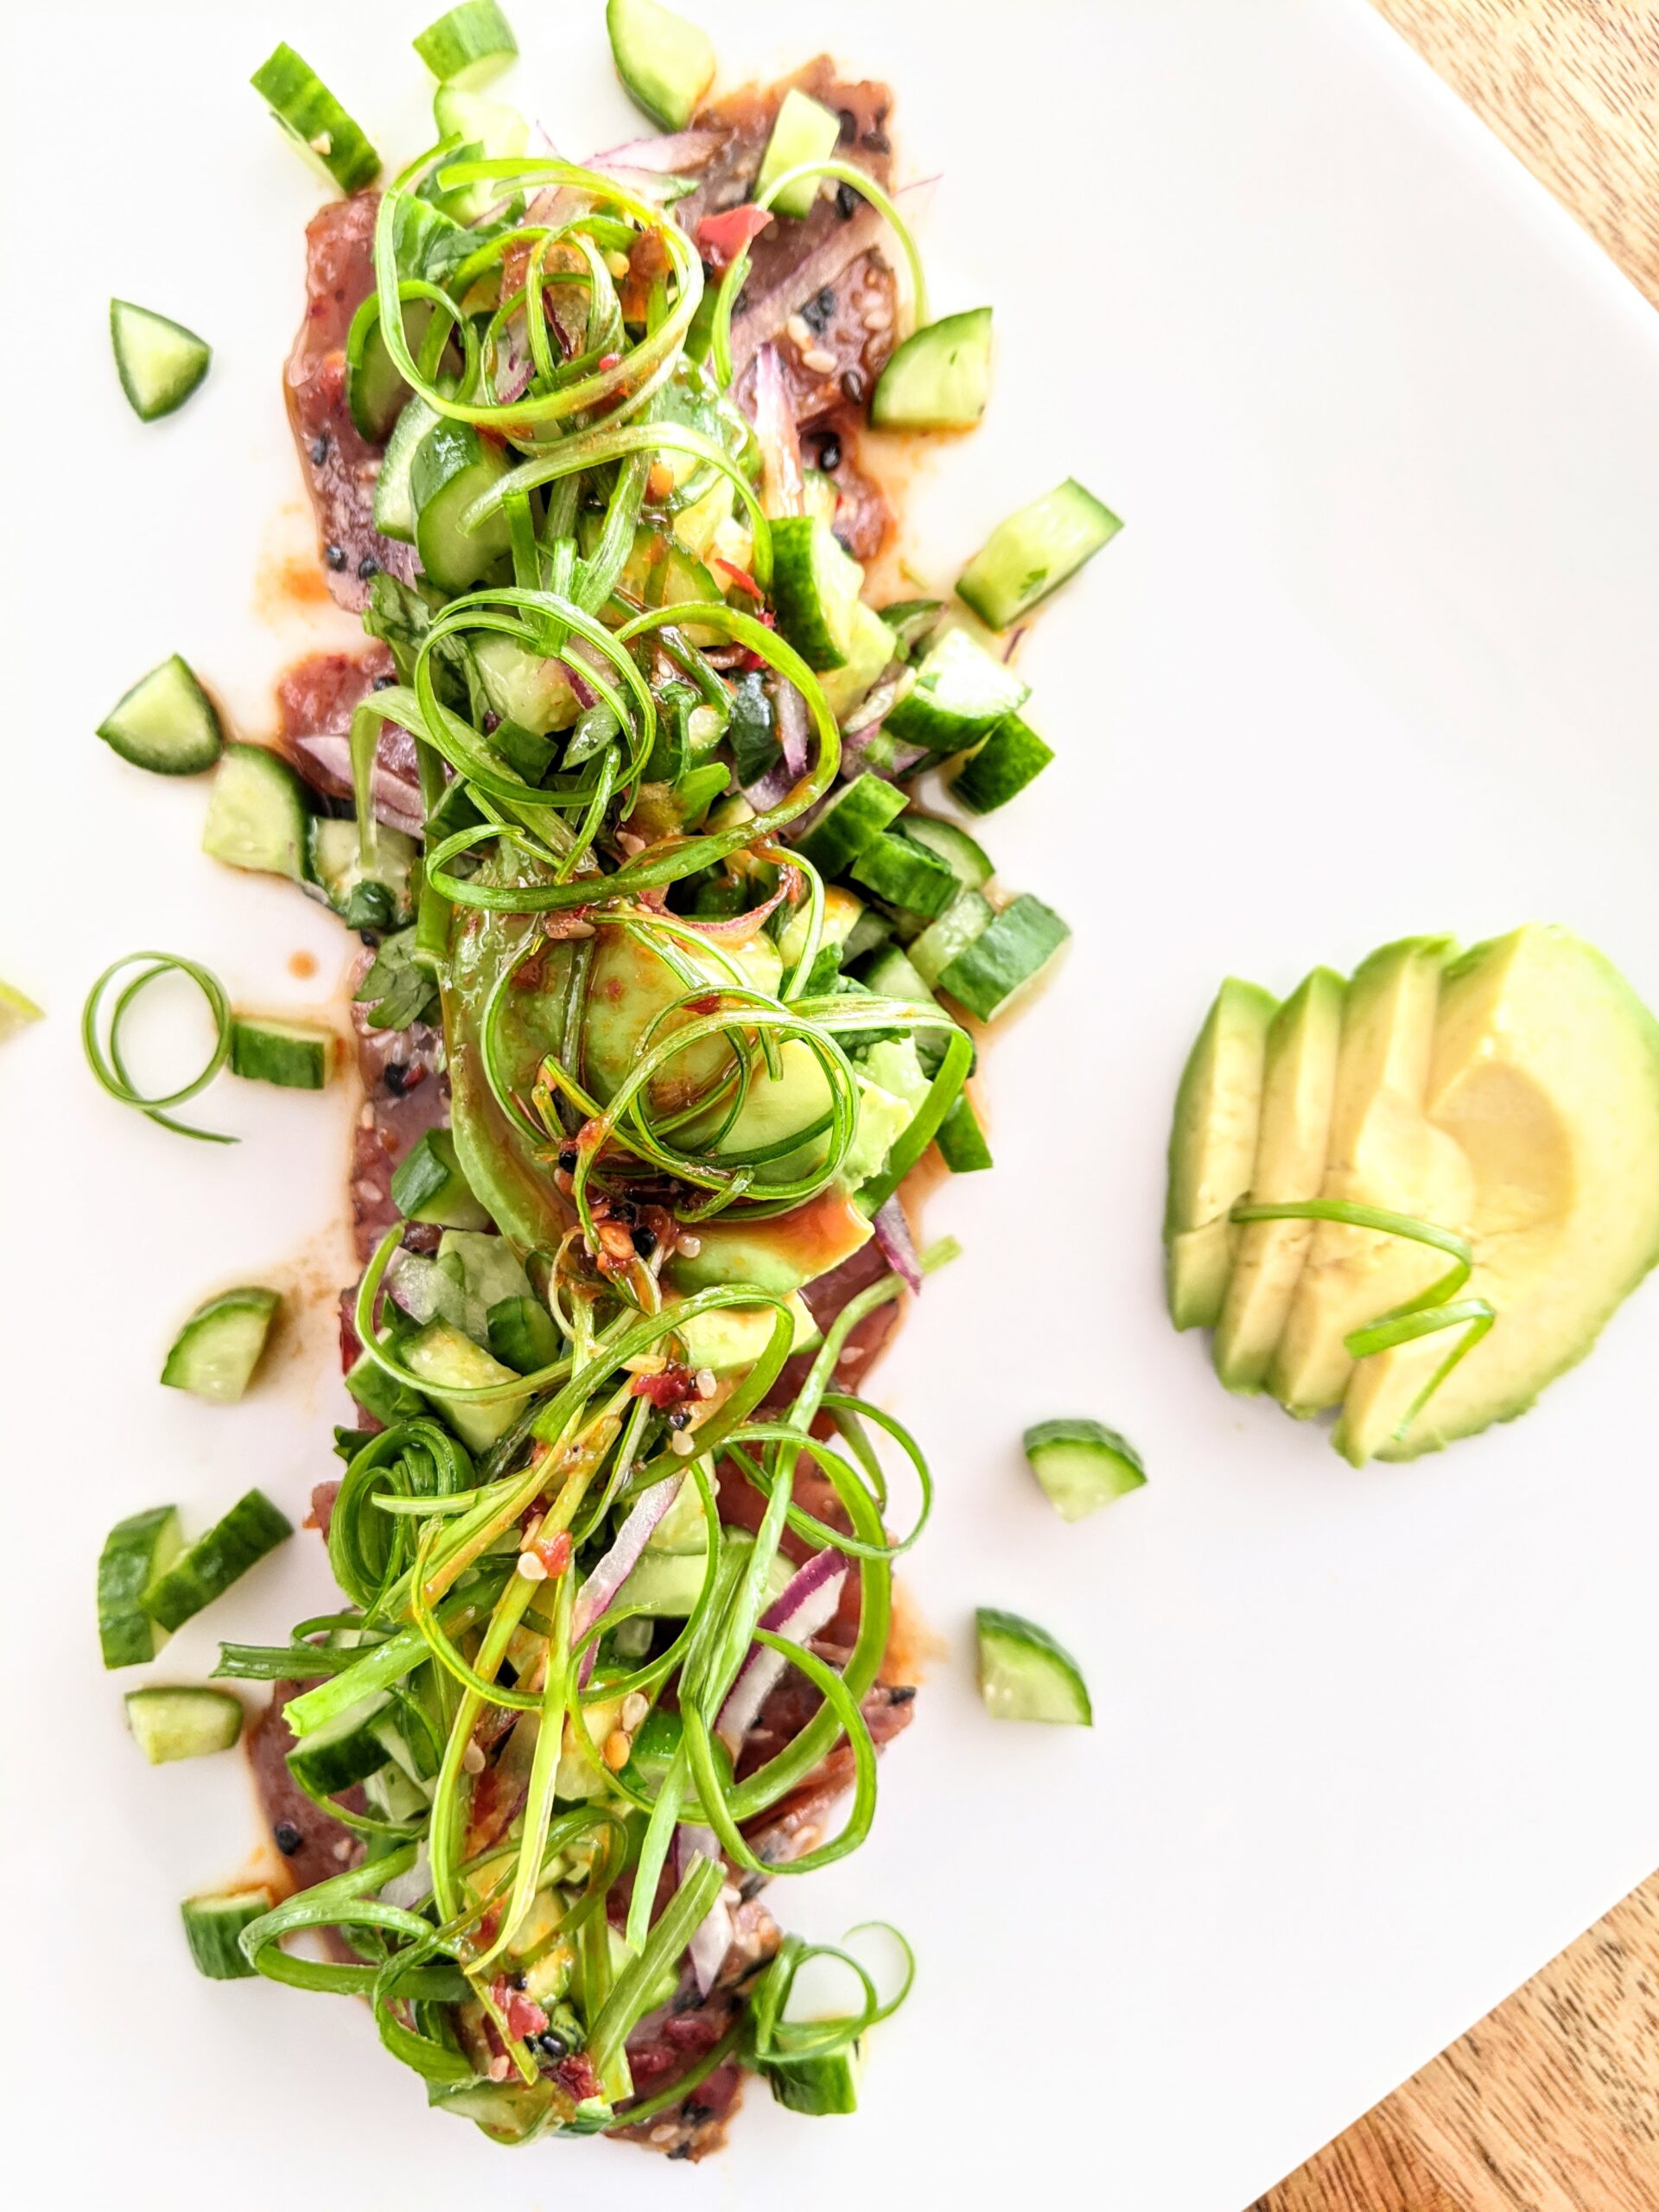 Marinated spicy ahi tuna tataki, topped and surrounded by spring onion curls, avocado slices, and diced cucumber salad.